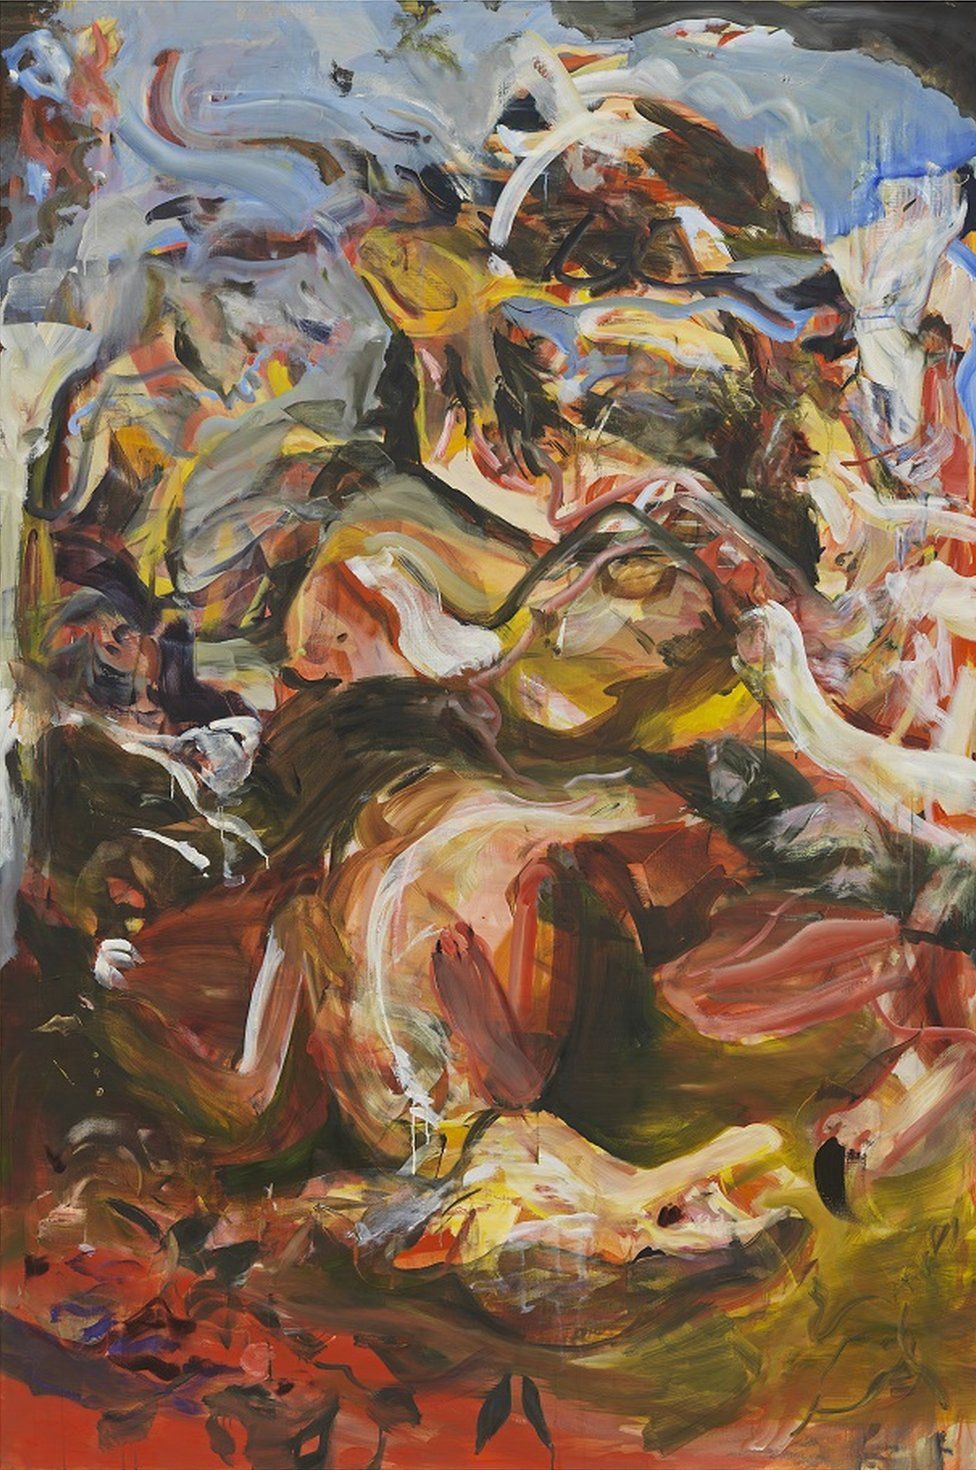 Dog Is Life, 2019, by Cecily Brown